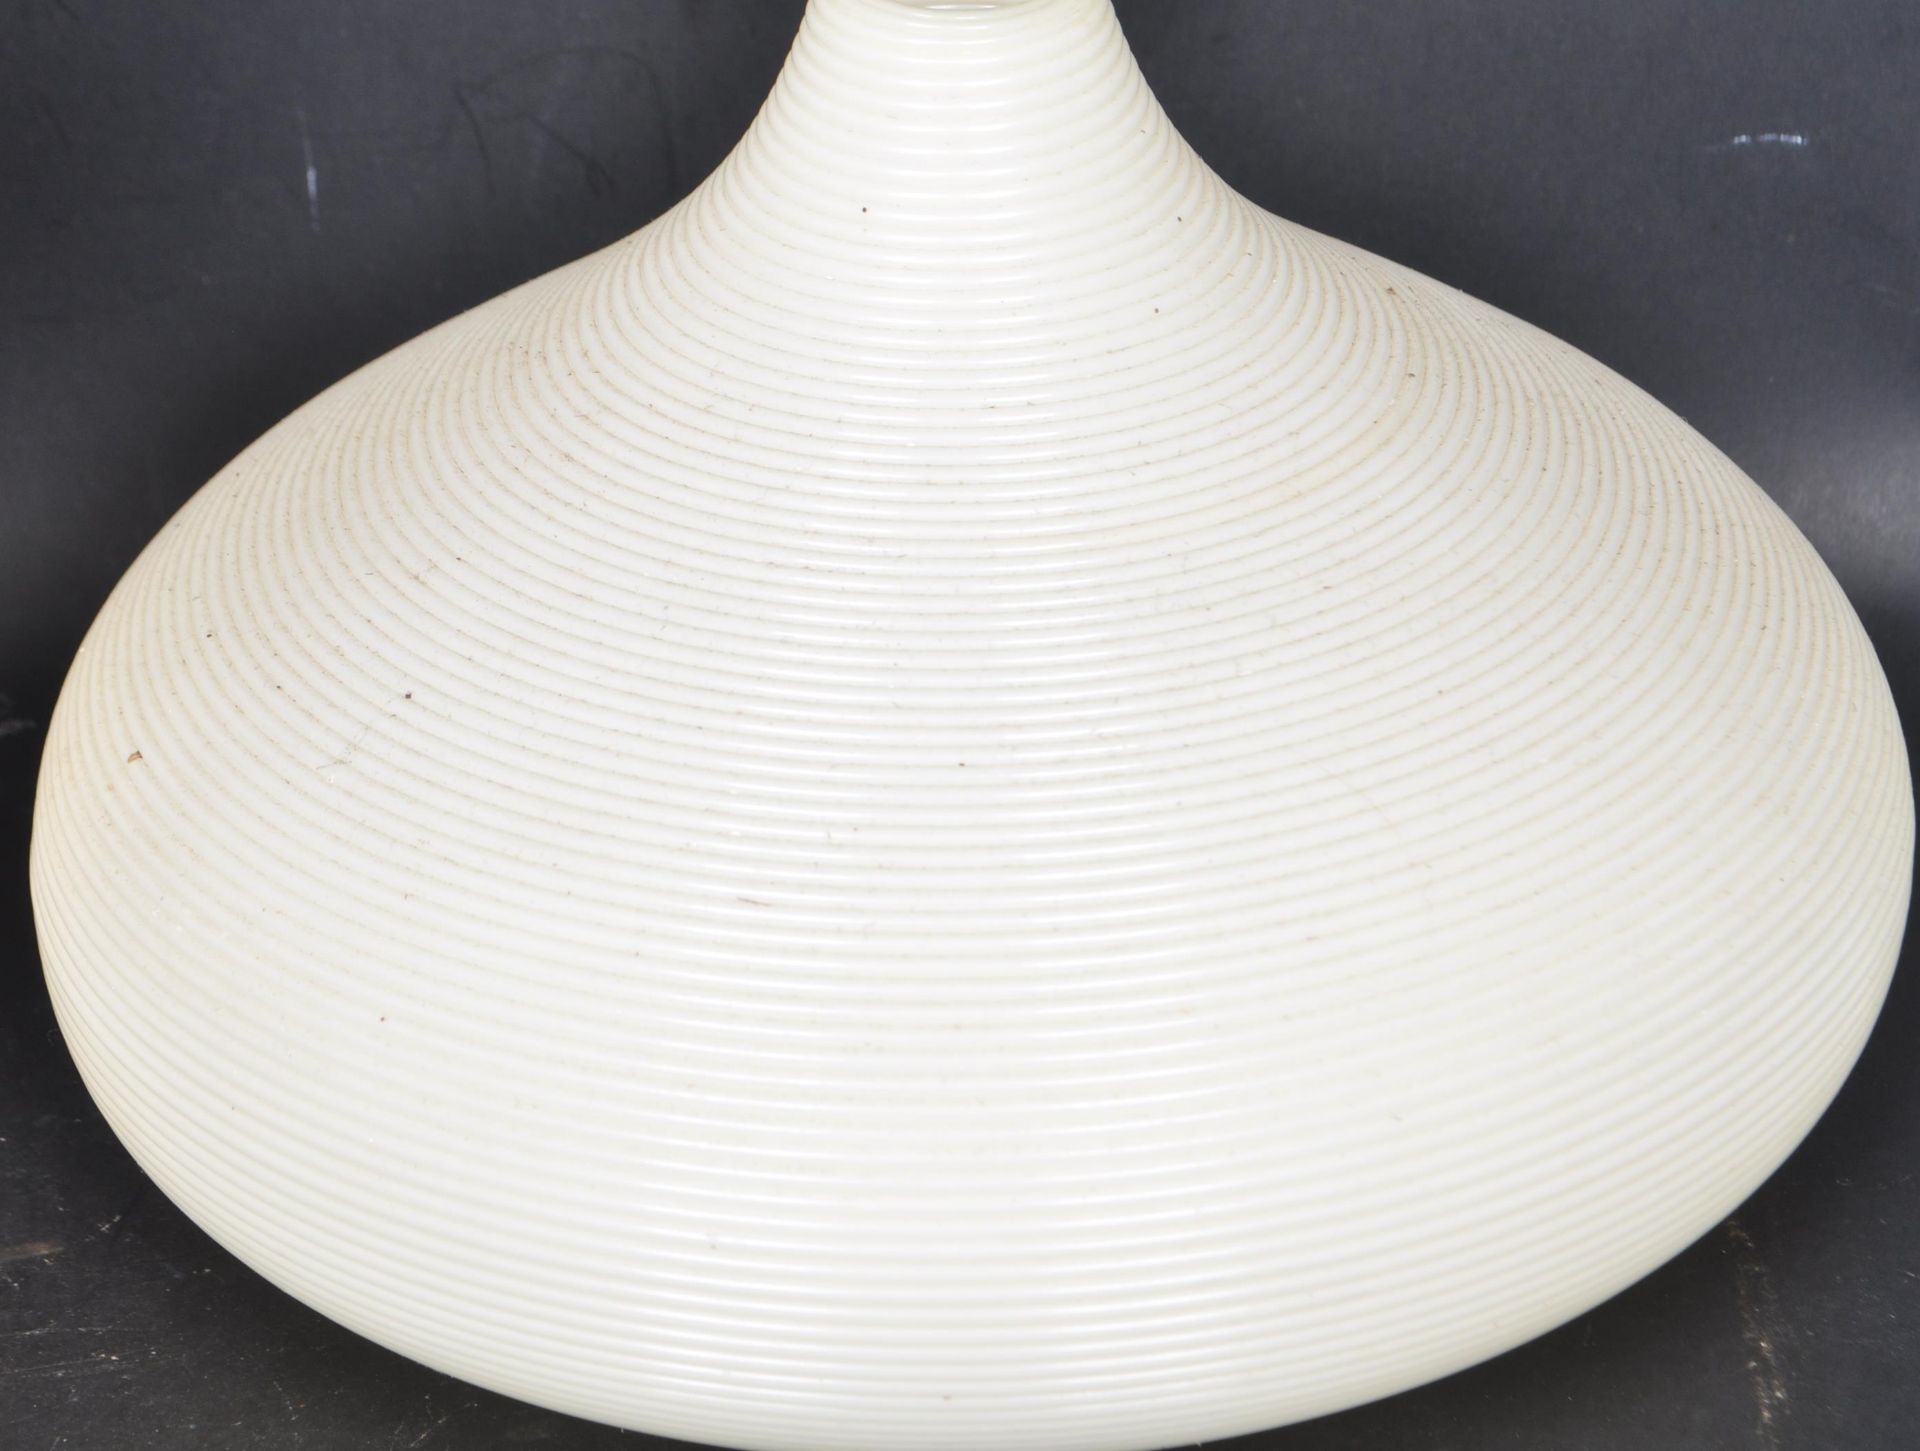 TWO RETRO VINTAGE MID 20TH CENTURY LAMPSHADES - Image 3 of 6